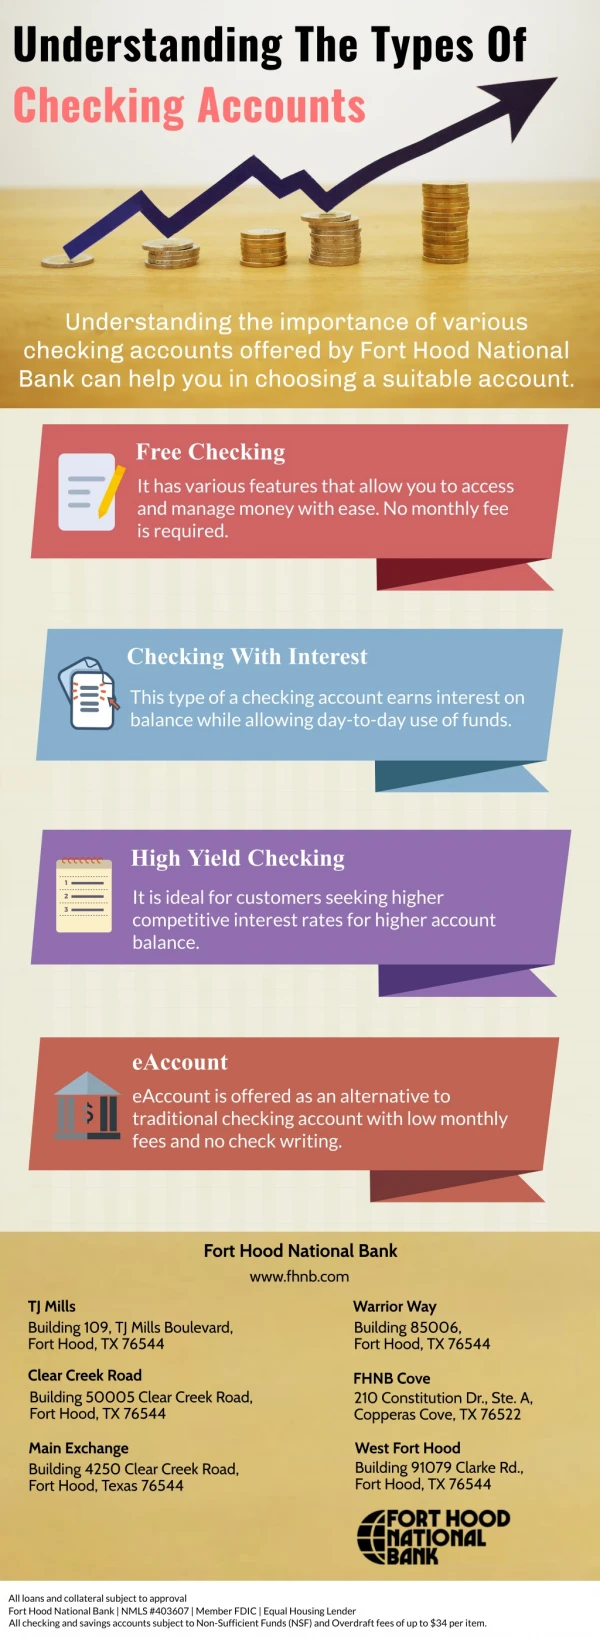 Understanding The Types Of Checking Accounts